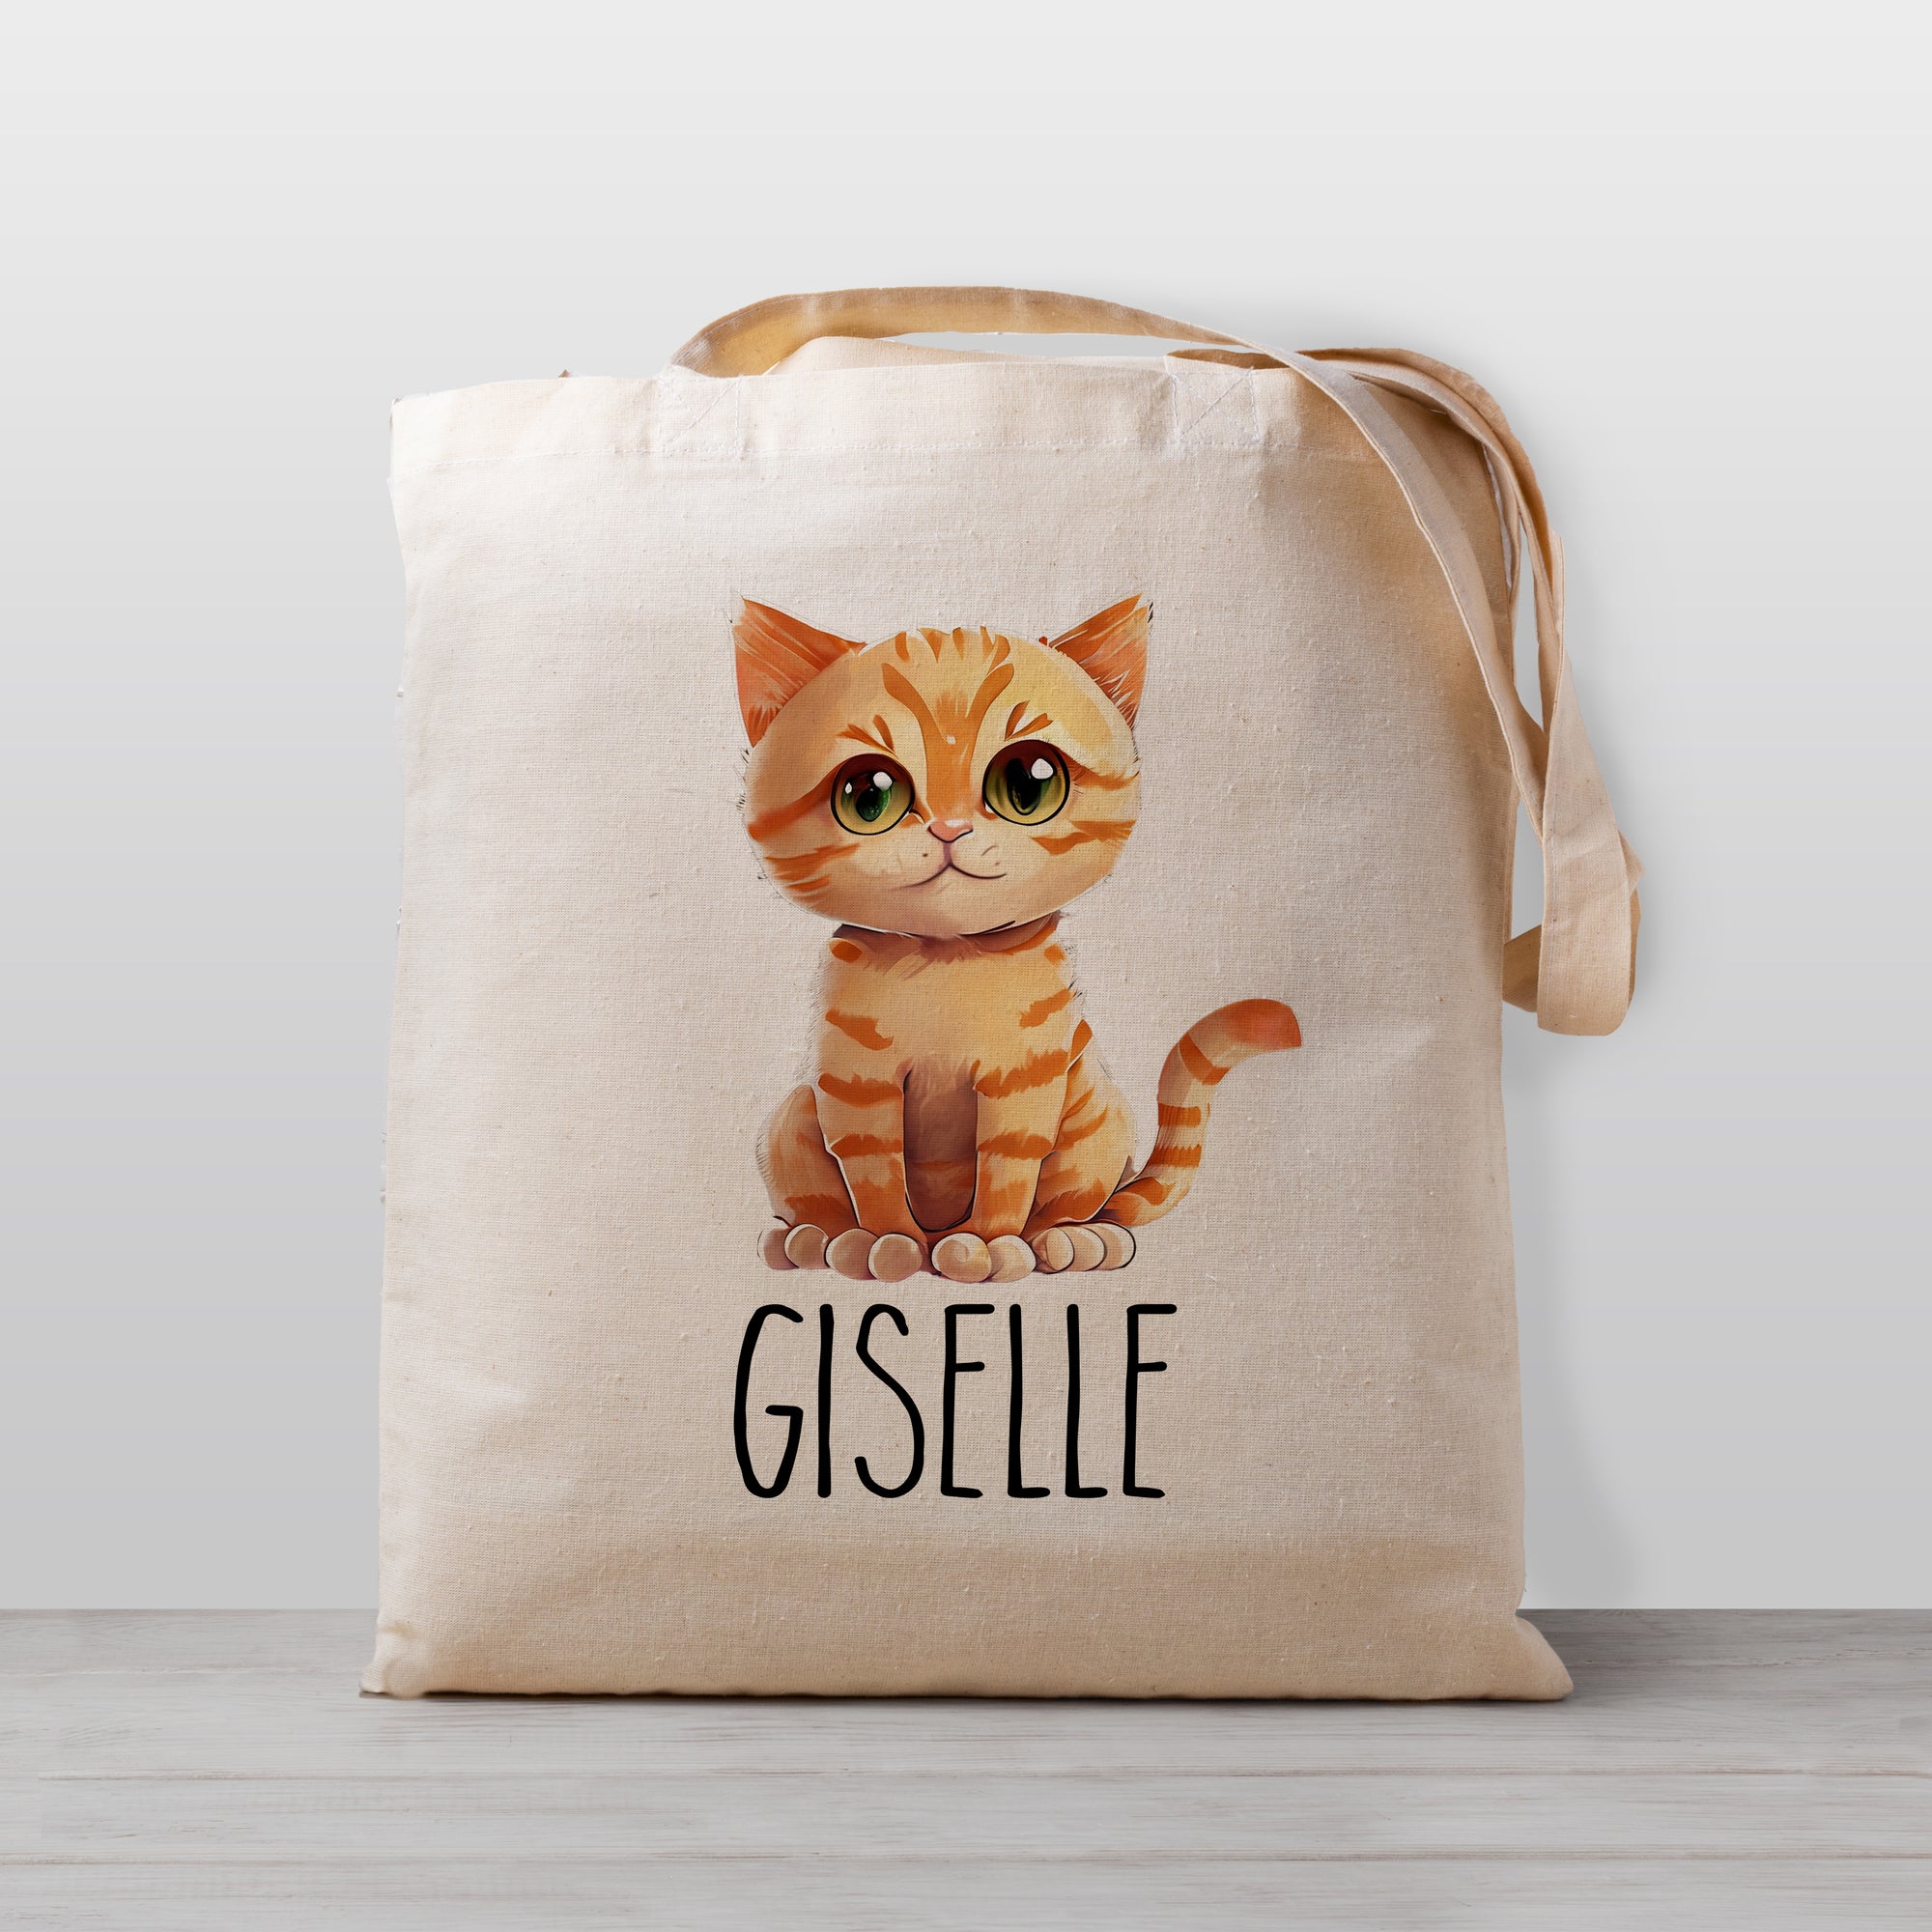 A personalized tote bag featuring a cute orange ginger tabby cat. 100% natural cotton canvas, sized for preschool, daycare, and kindergarten